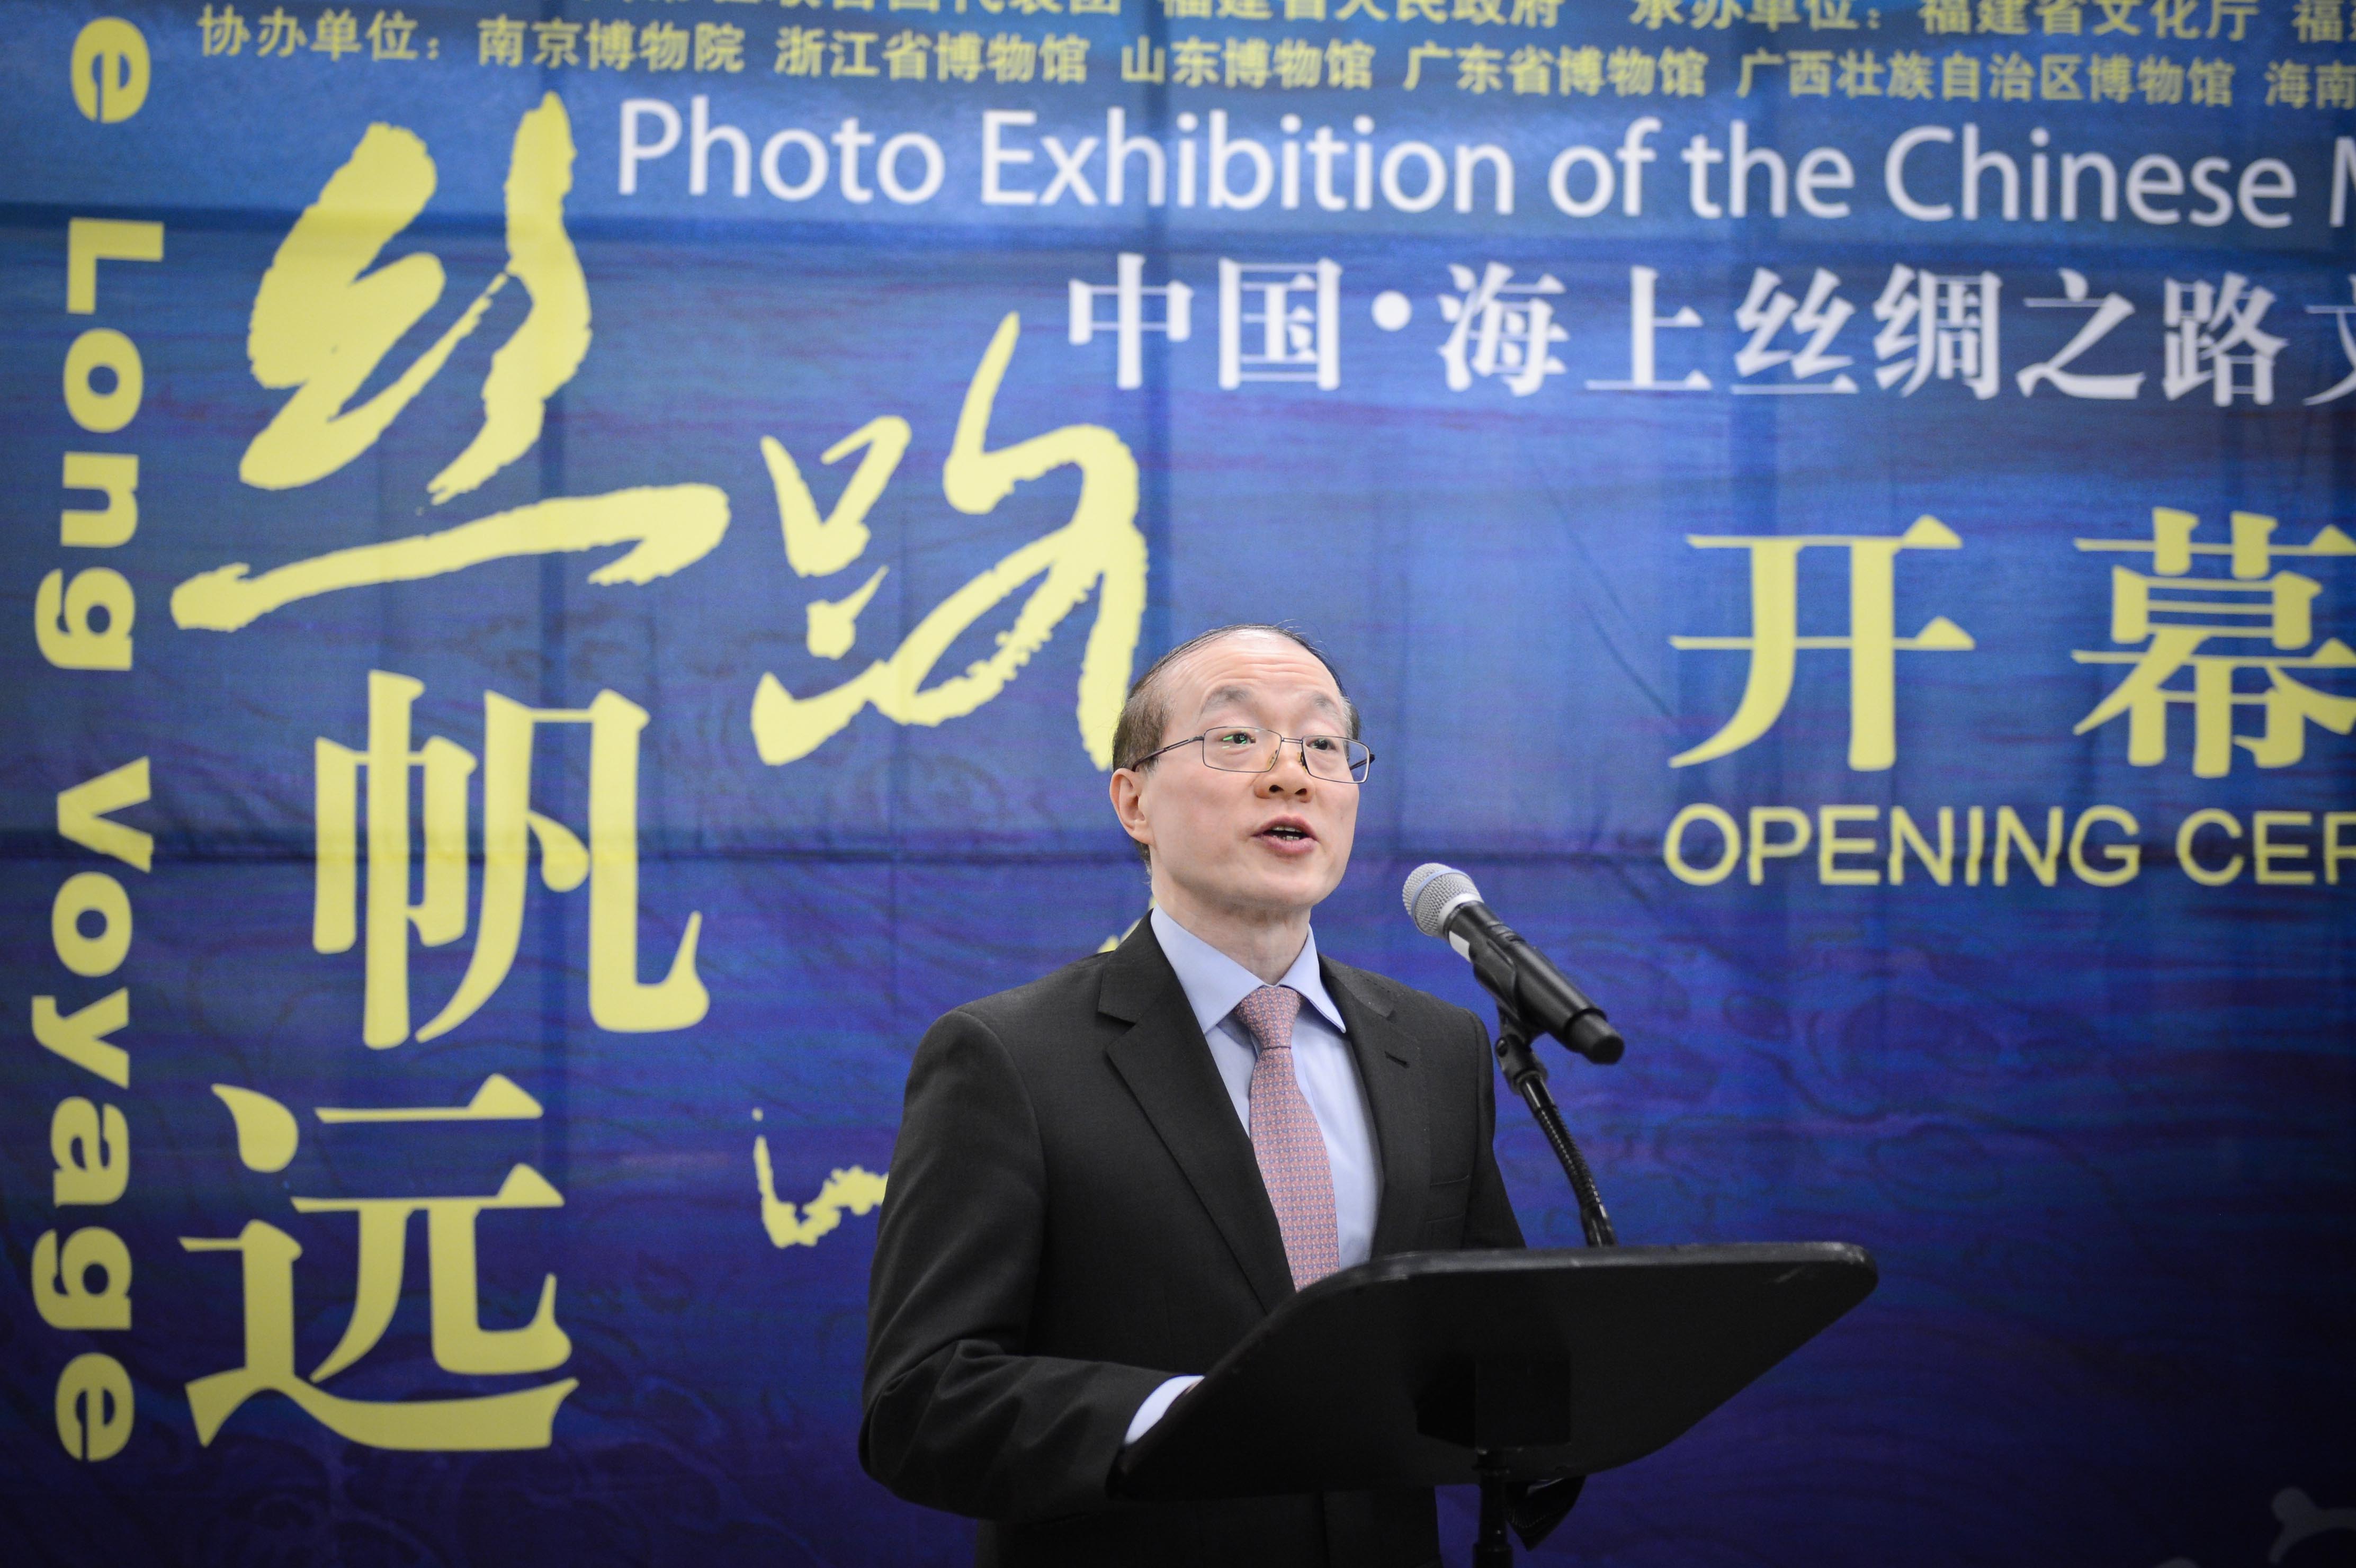 The opening ceremony of a photo exhibition on China's  Maritime Silk Road at UN headquarters in New York. Photo: Xinhua